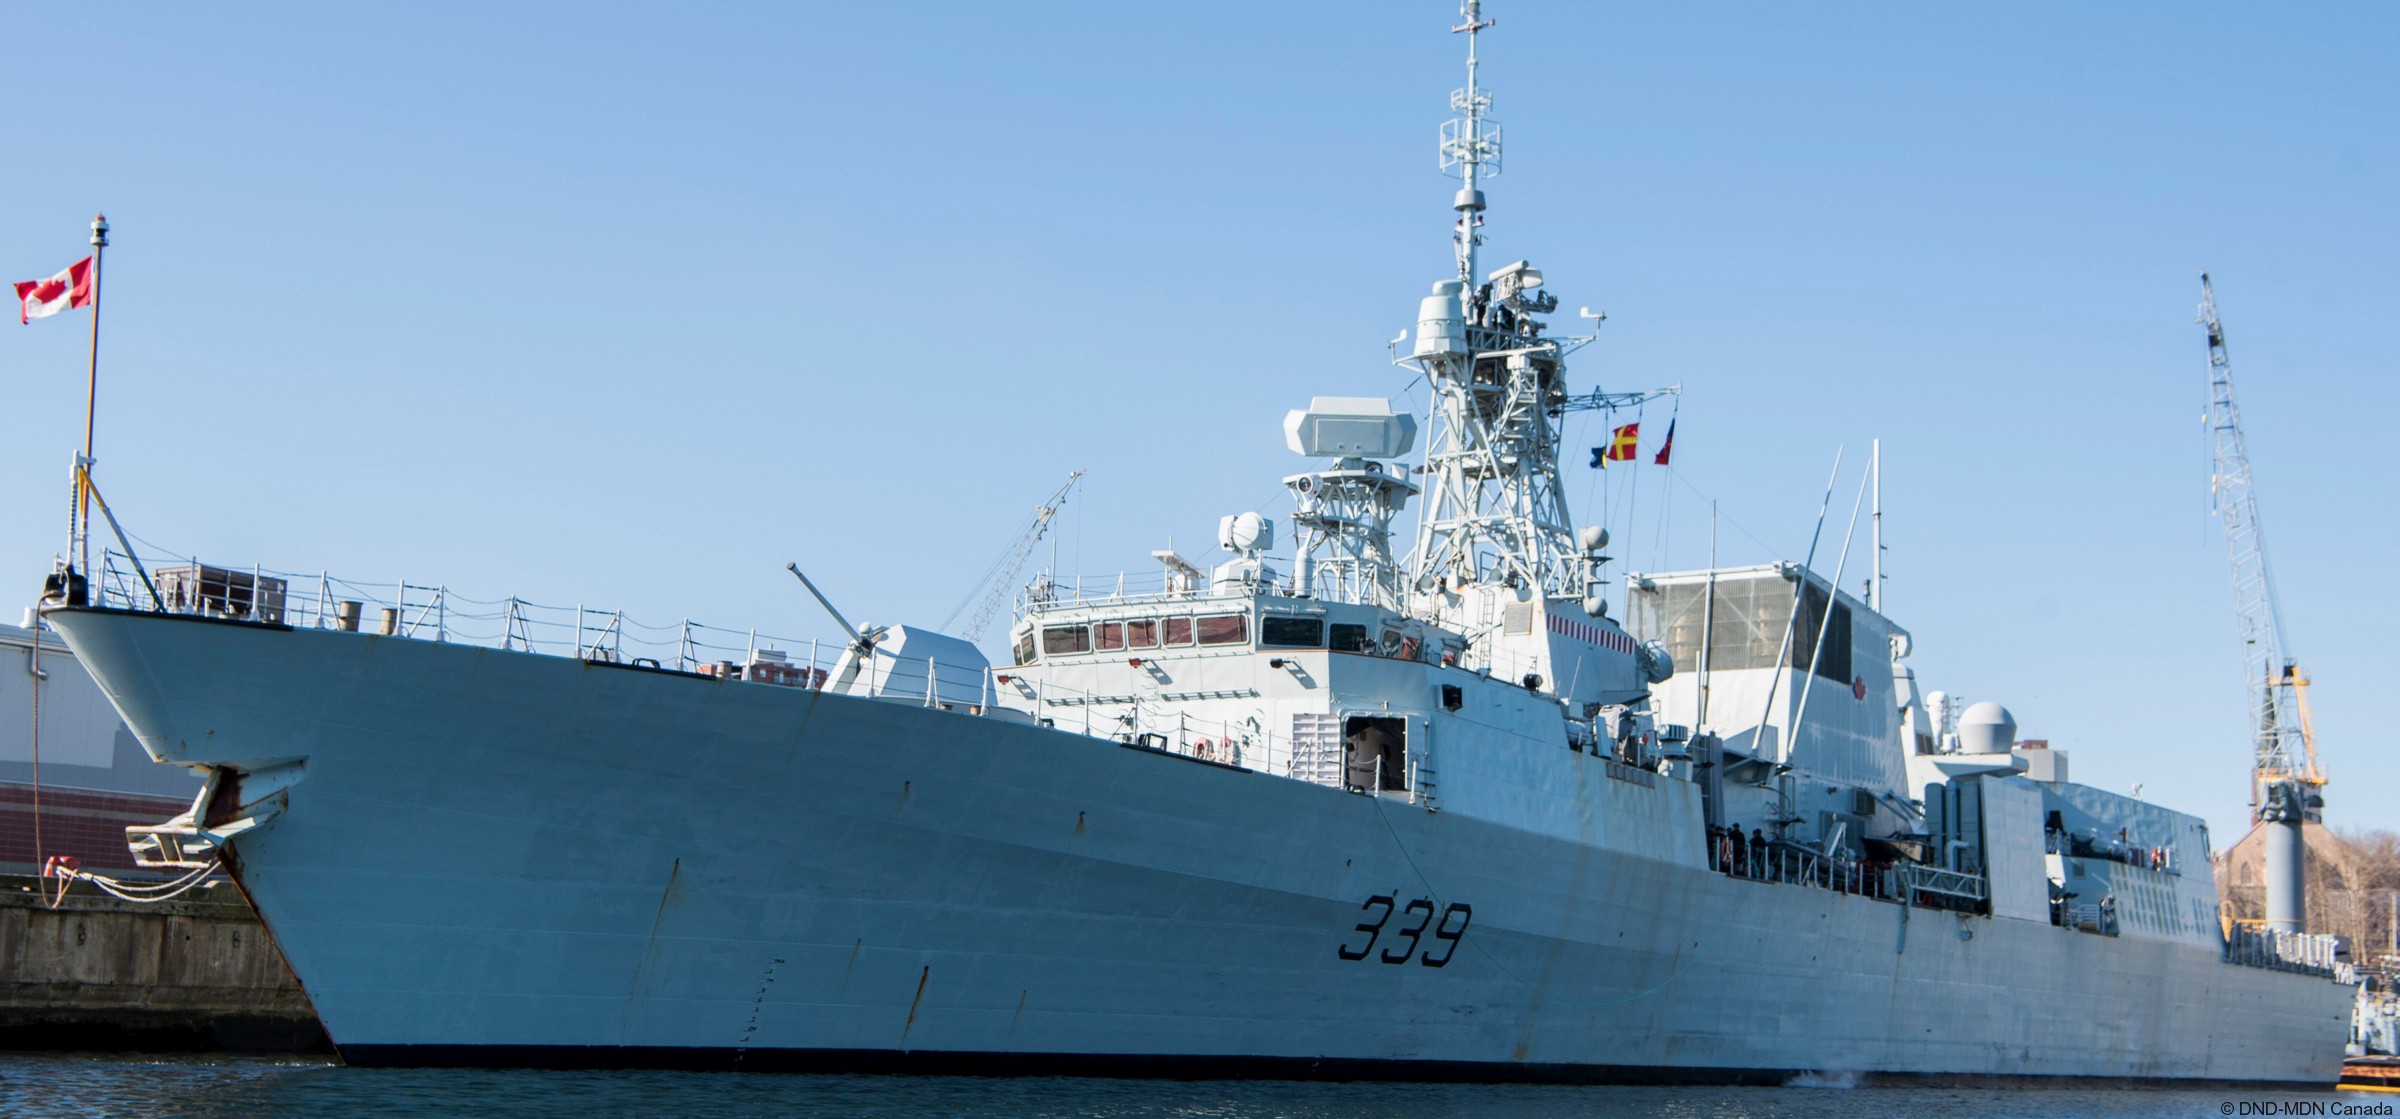 ffh-339 hmcs charlottetown halifax class helicopter patrol frigate ncsm royal canadian navy 21